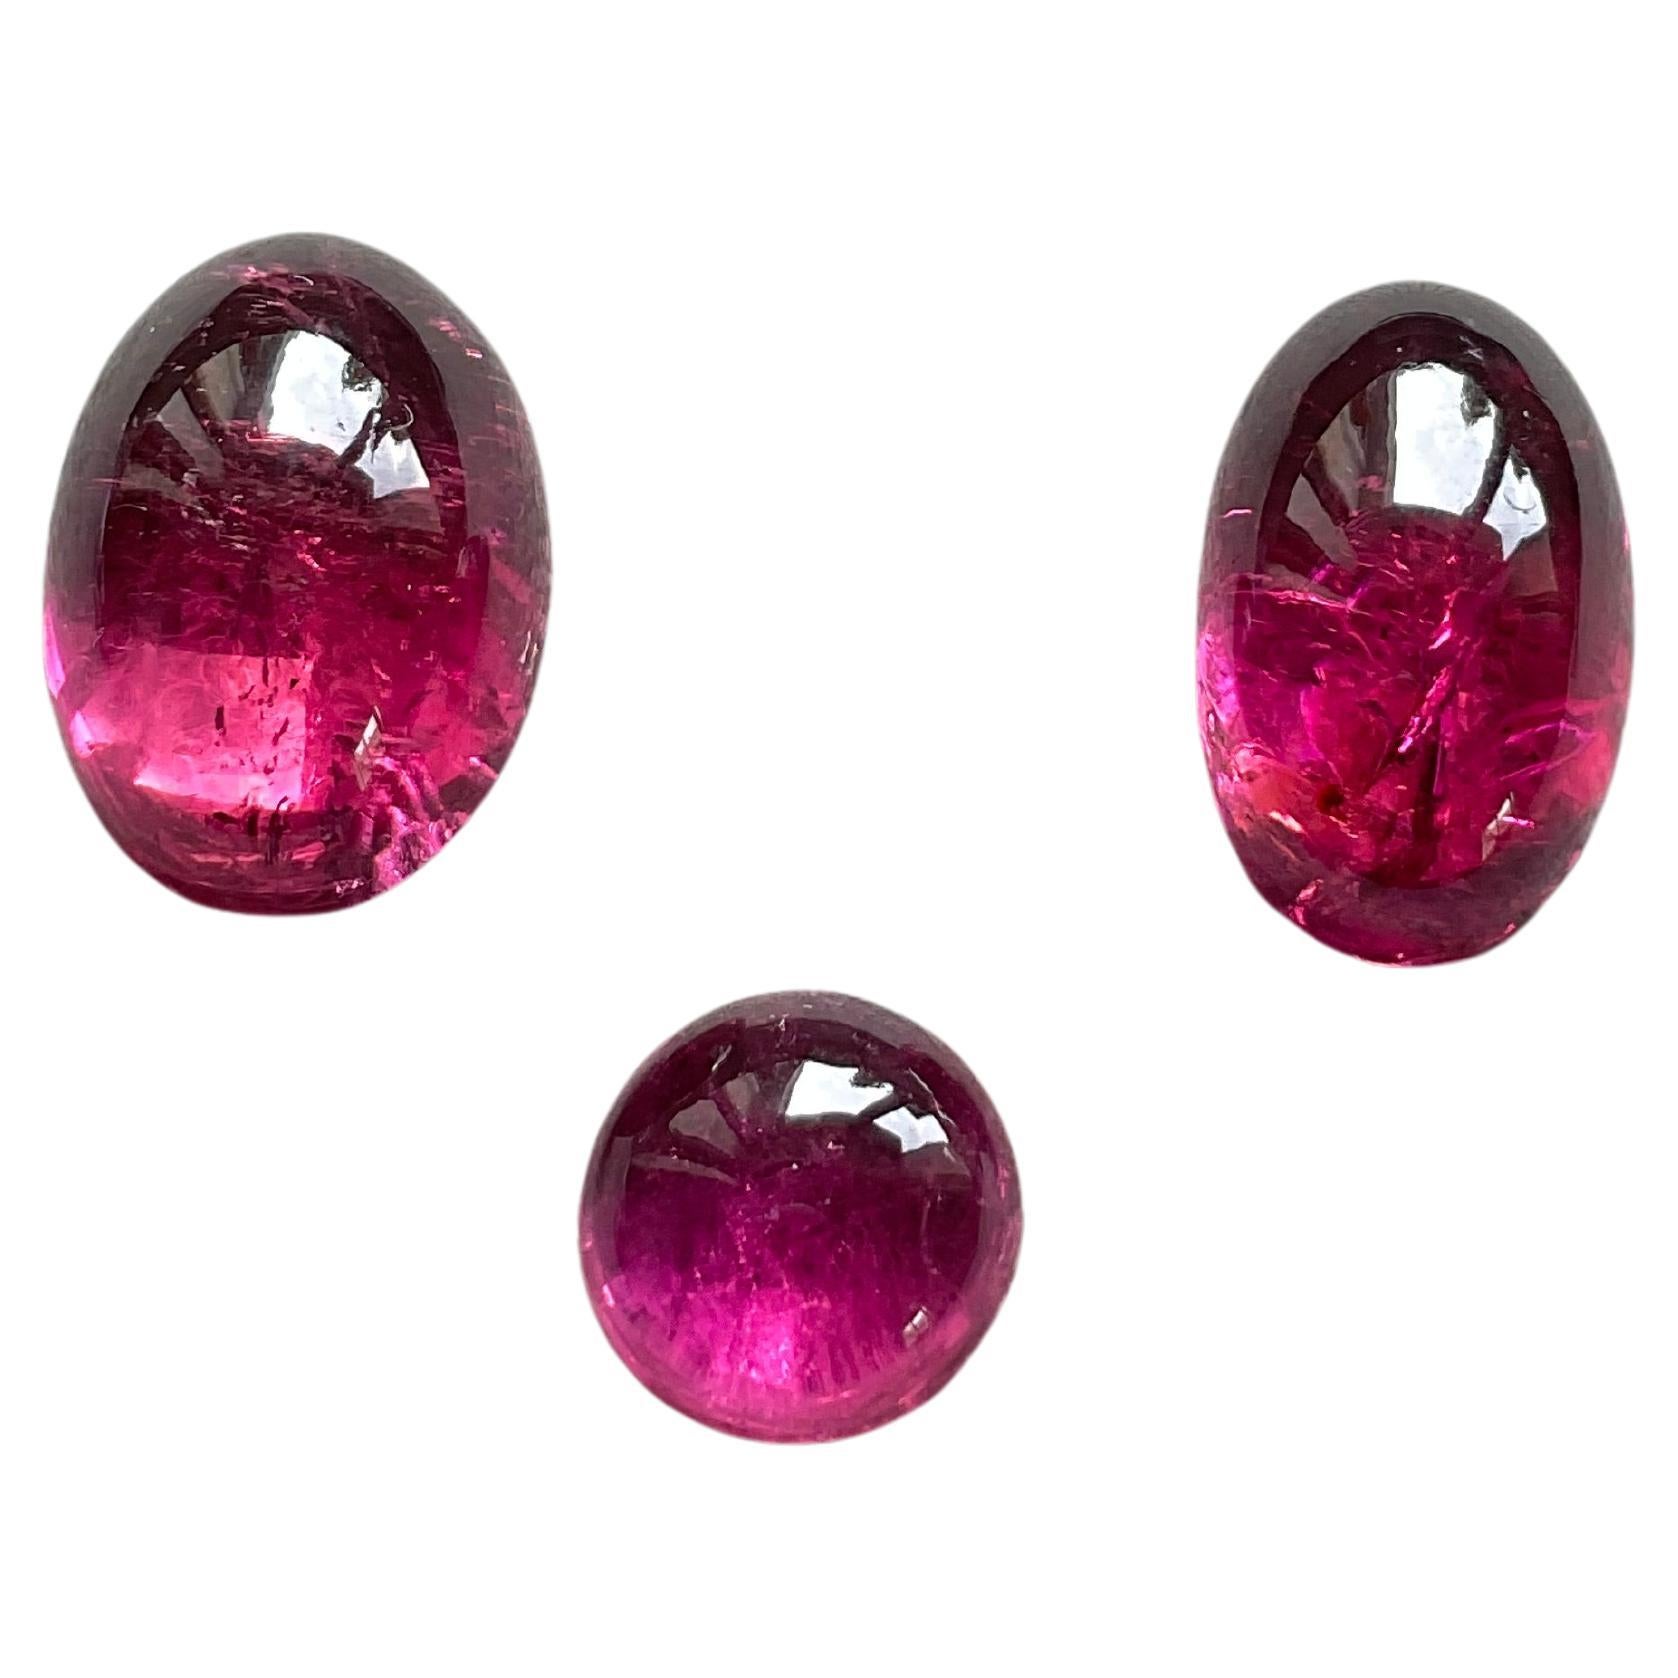 25.21 Carats Top Quality Rubellite Tourmaline Cabochon 3 Pieces Natural Gemstone